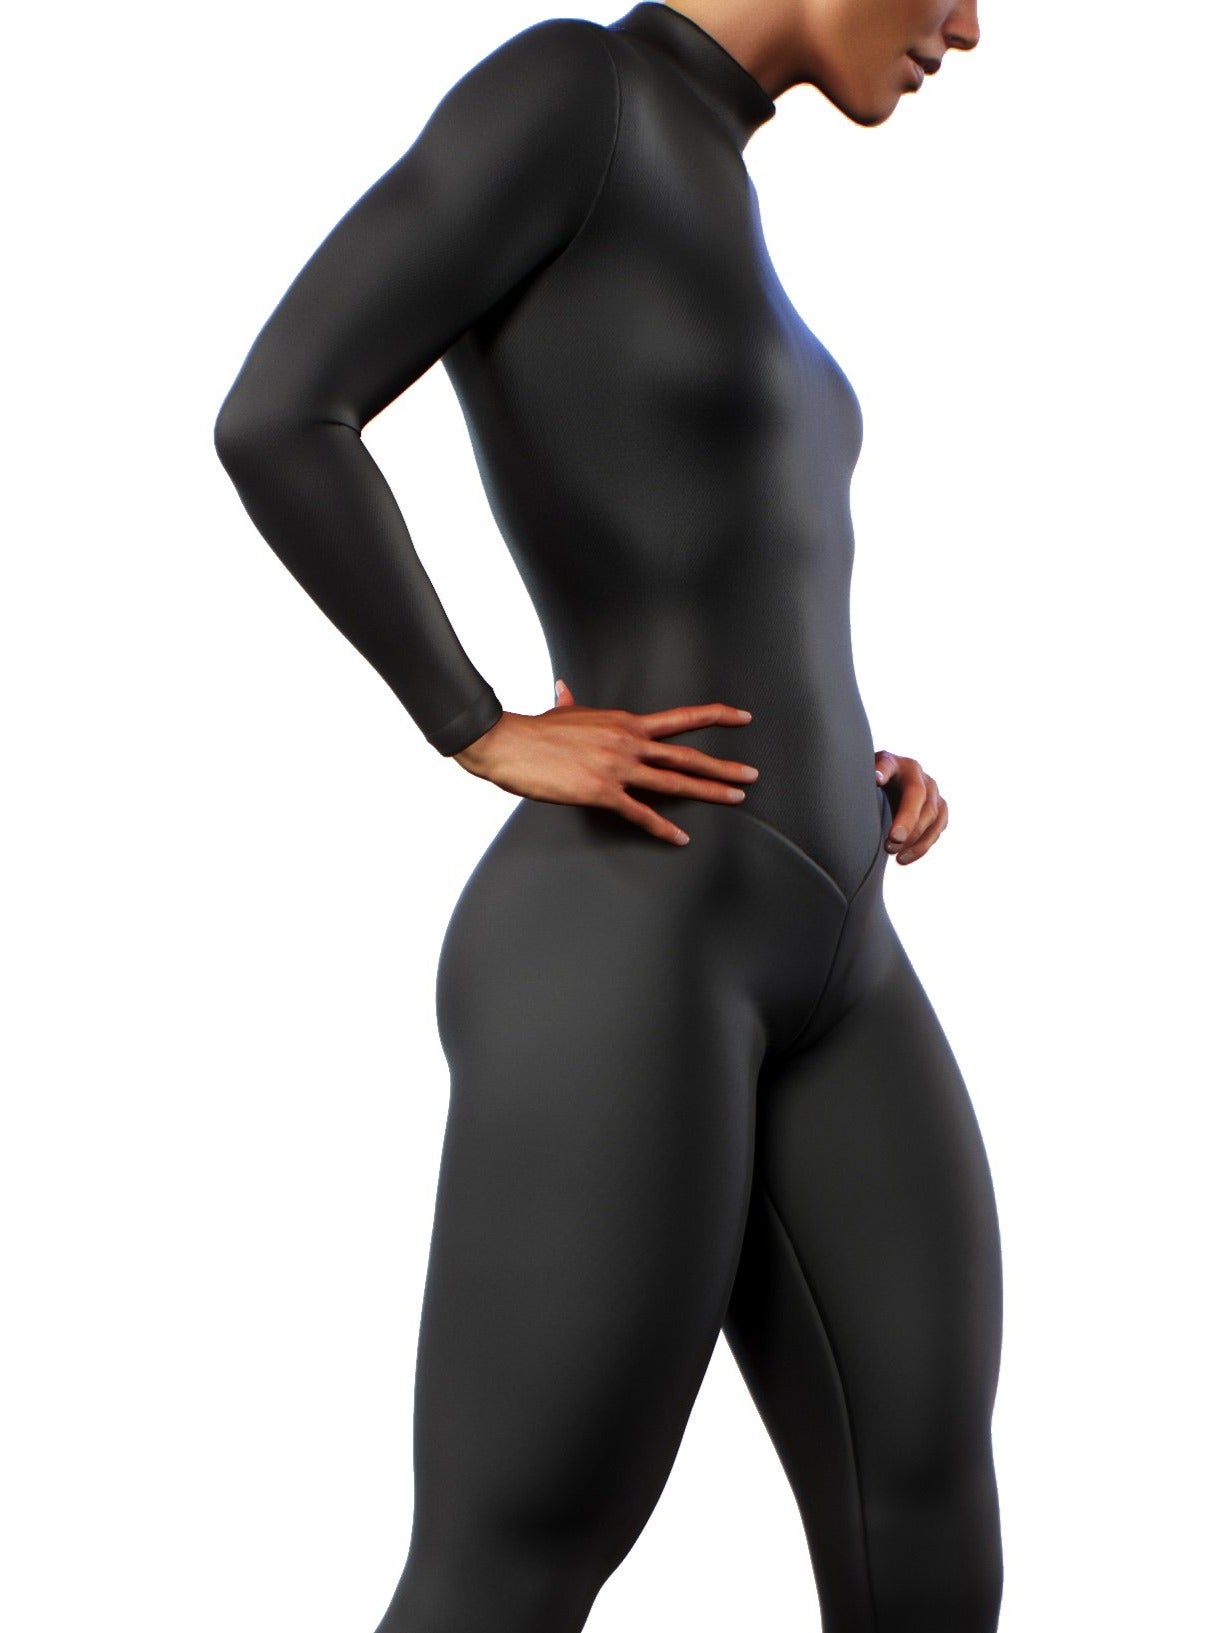 Catsuit 30012 Women Workout Clothing - Gym Clothes